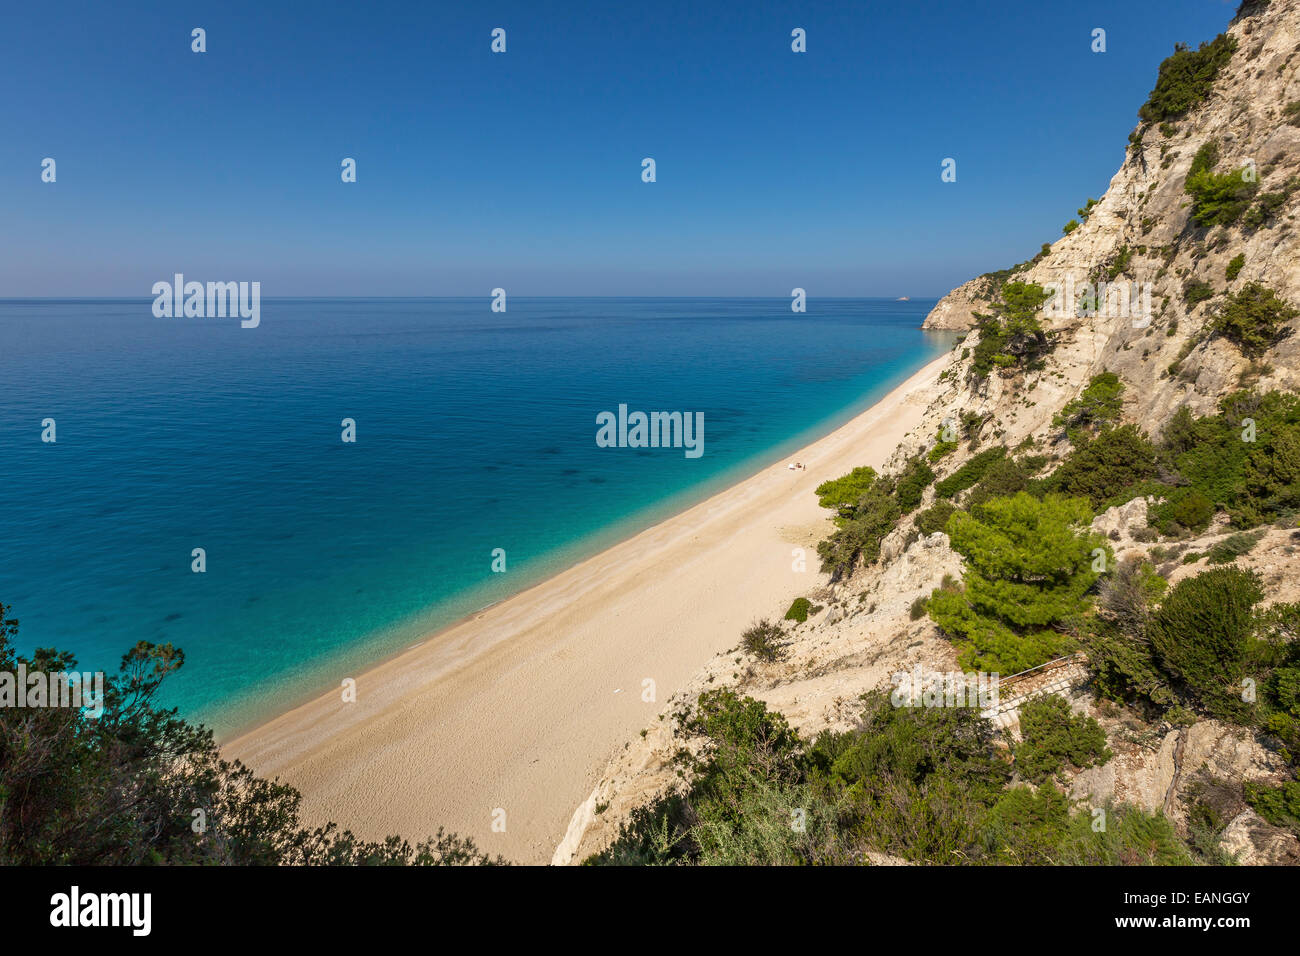 An aerial view of Egremni beach on Lefkada in Greece taken towards the top of the 325 steps leading down to the beach. Stock Photo